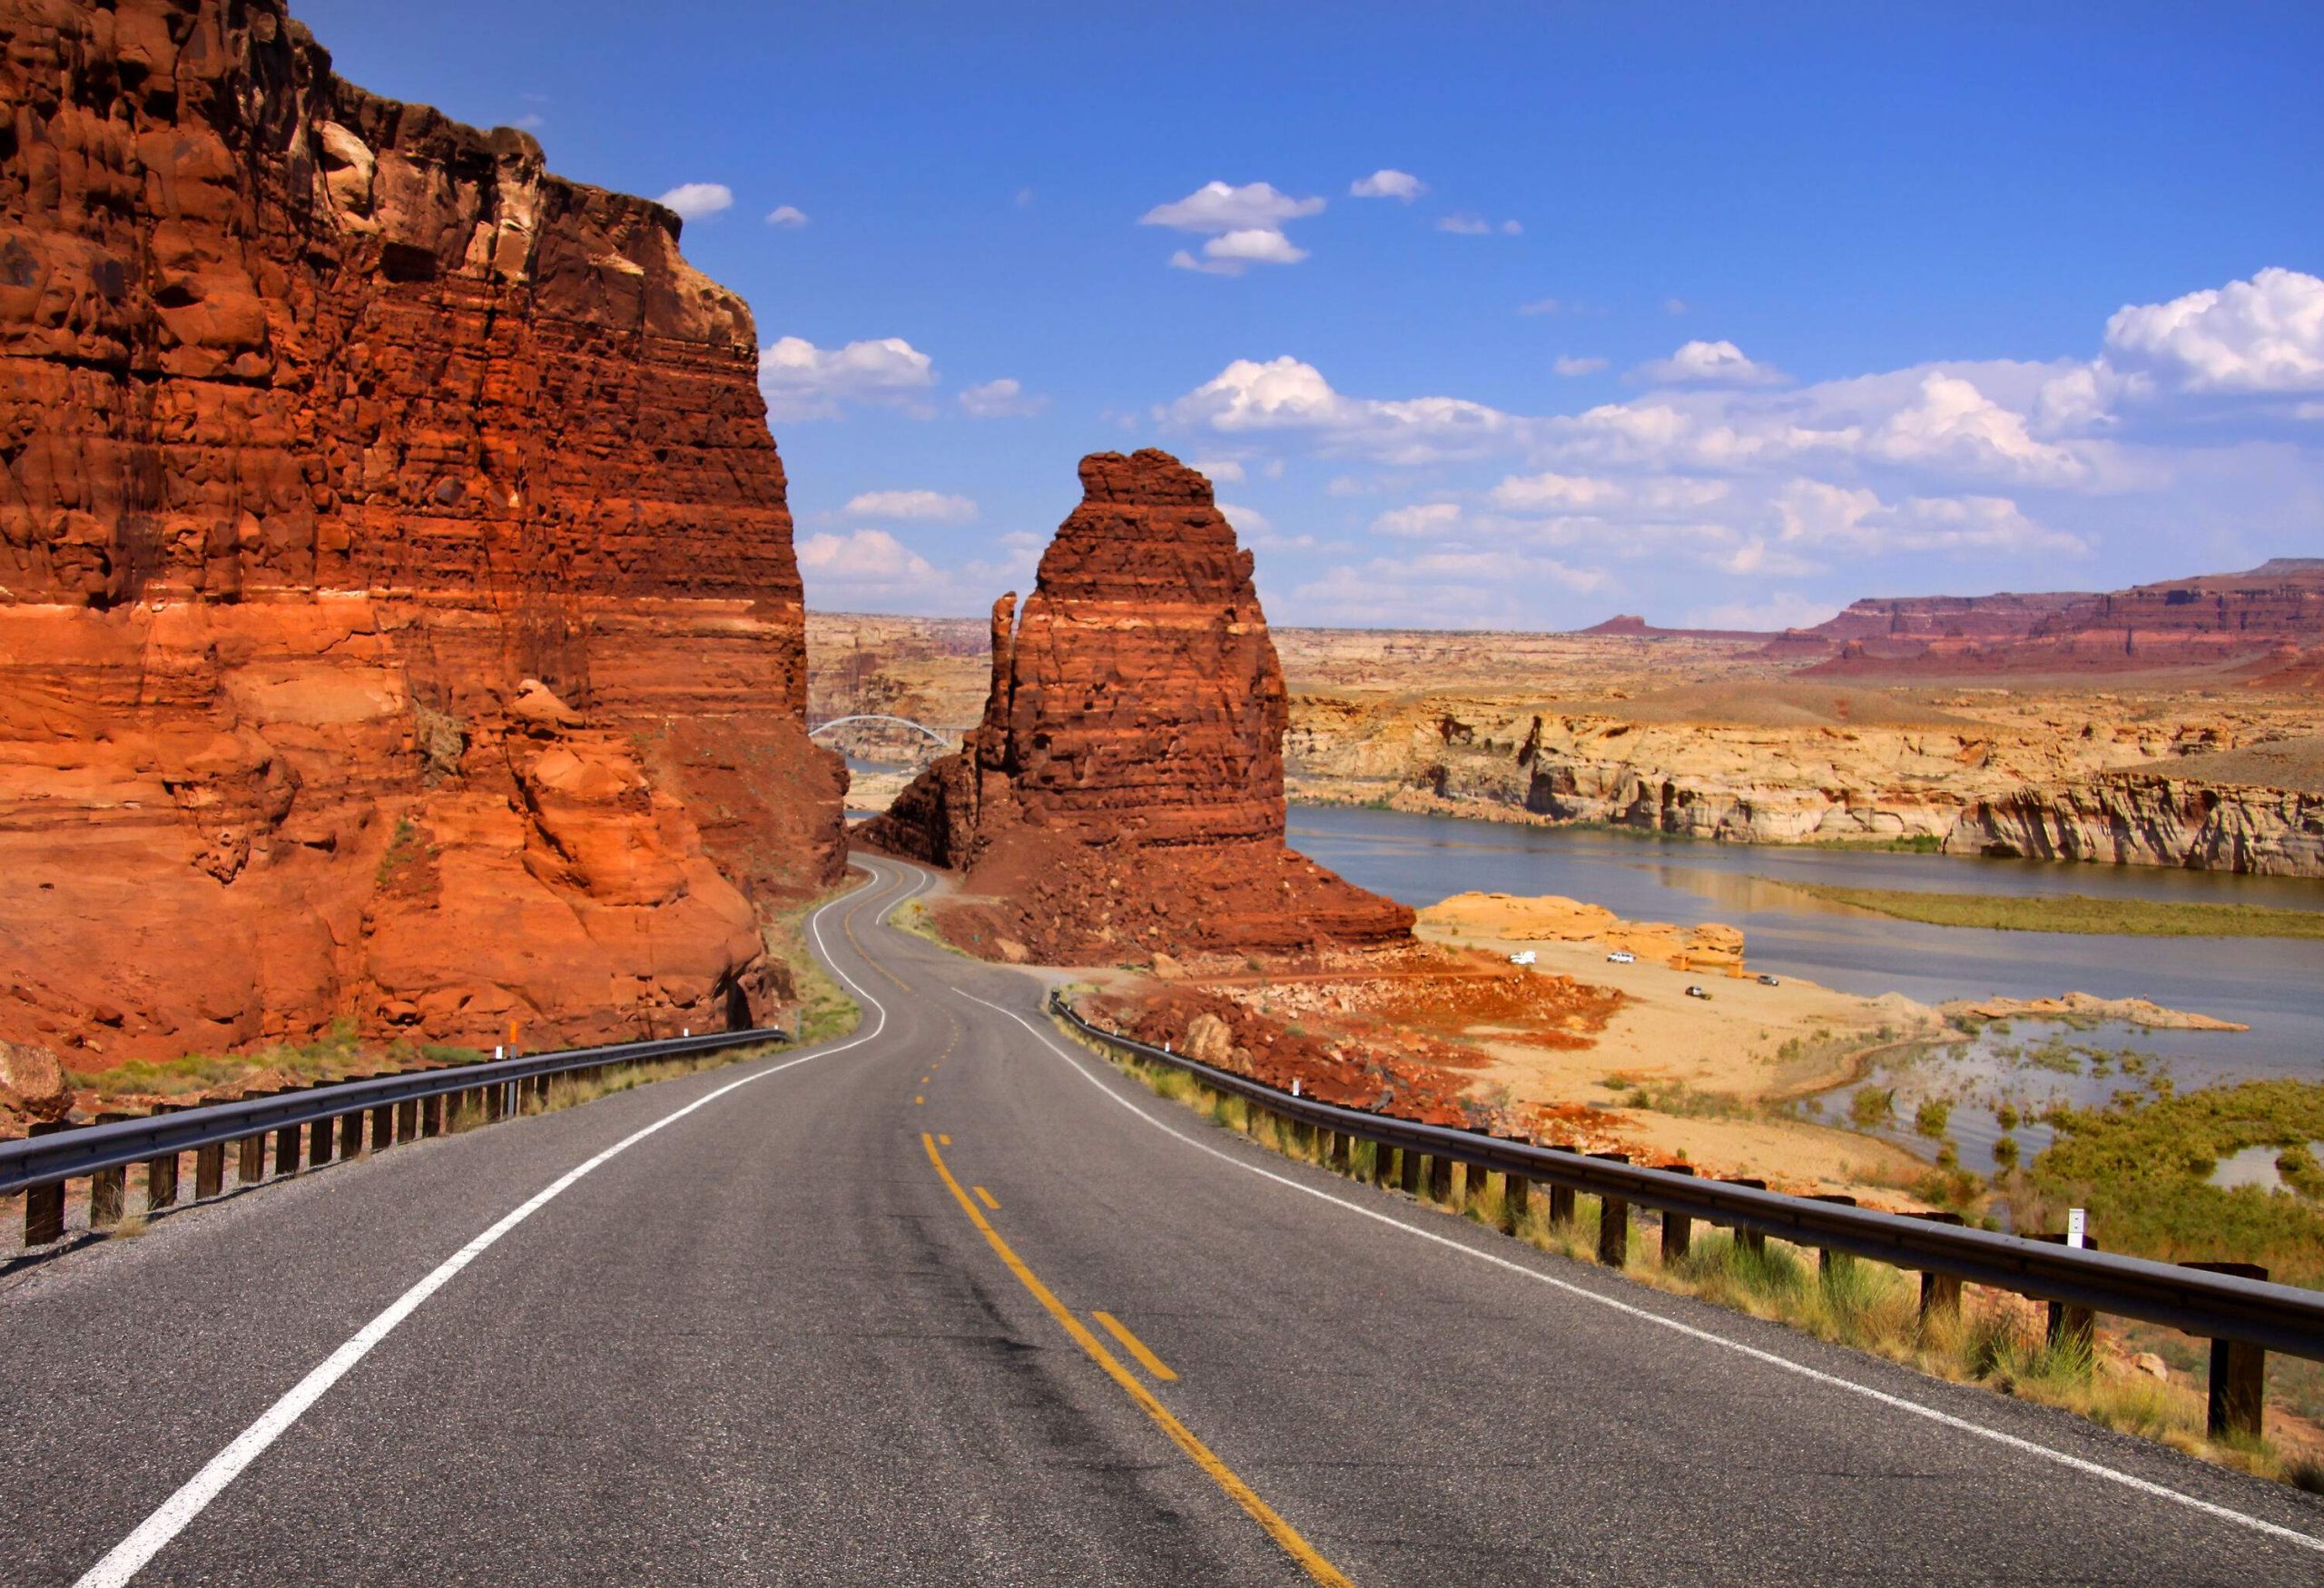 An empty road between the red and orange sandstone canyons with riverfront views.